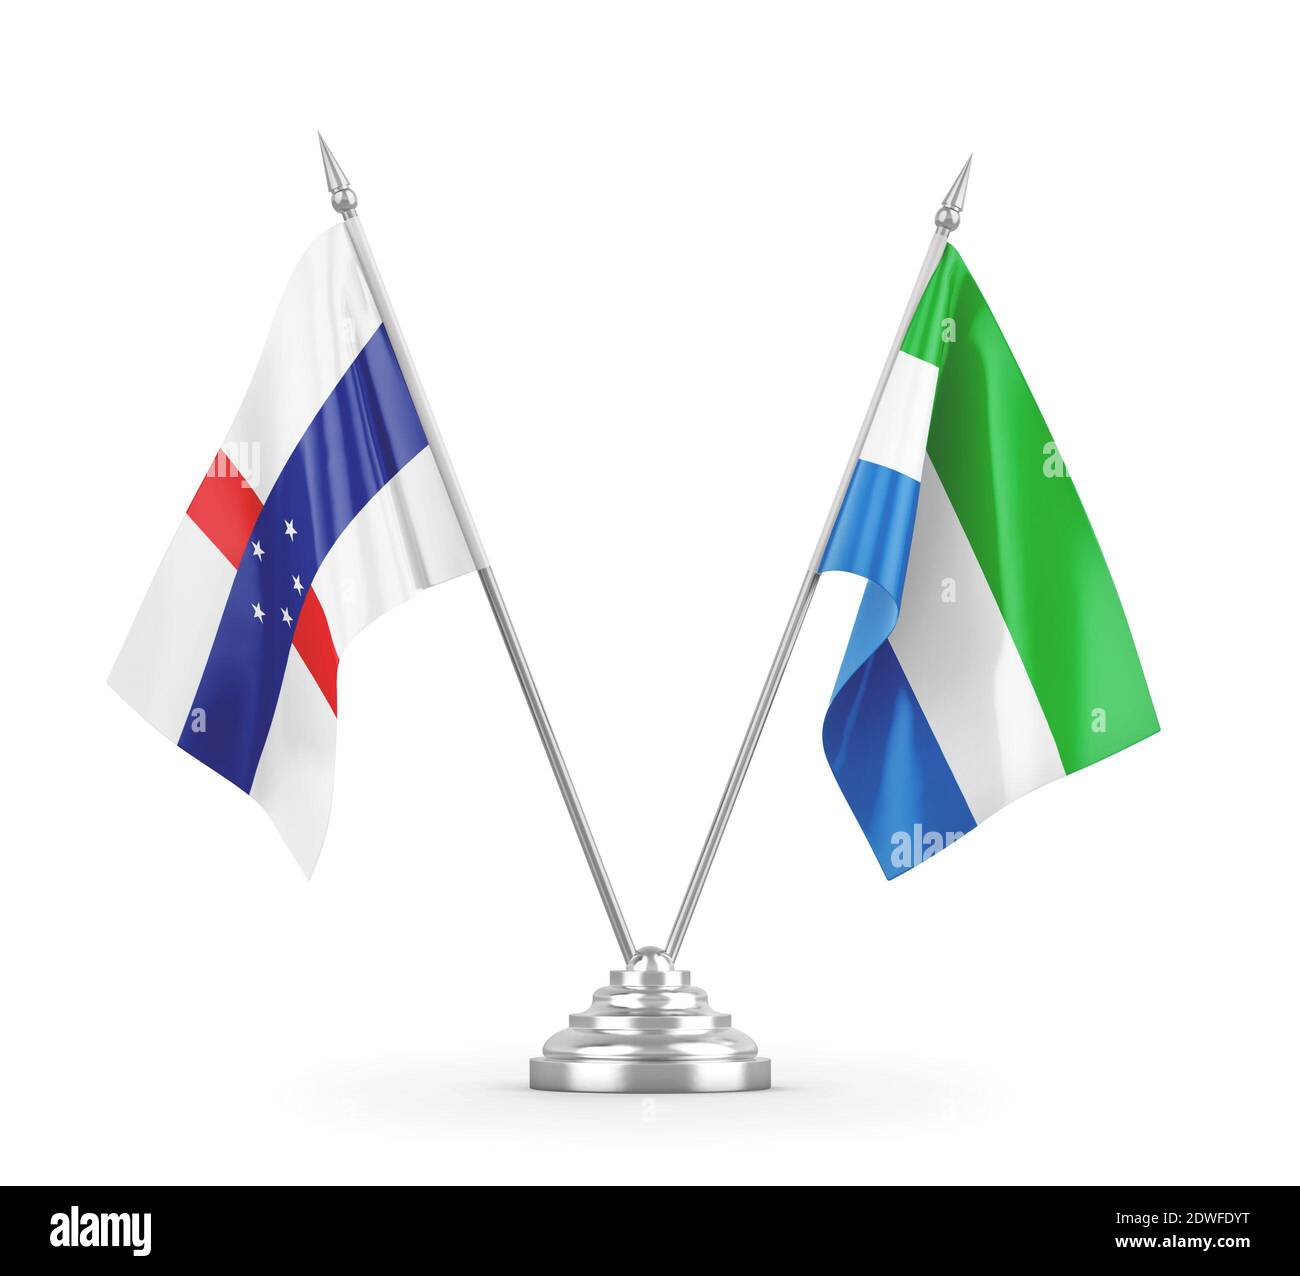 Sierra Leone and Netherlands Antilles table flags isolated on white 3D rendering Stock Photo